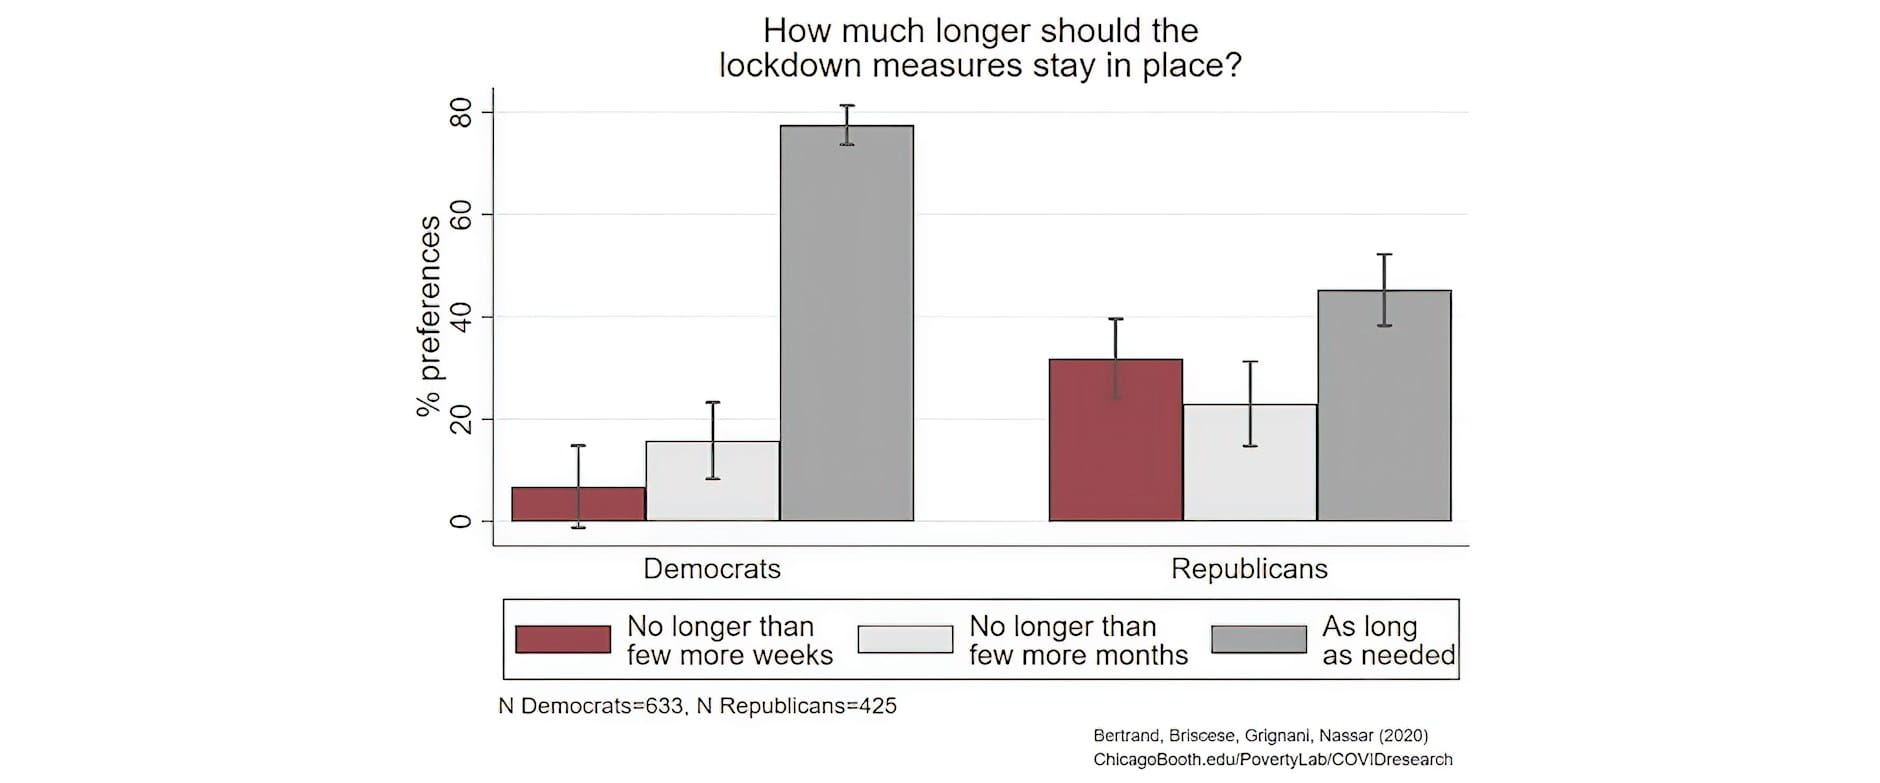 Figure showing how much longer people think the lockdown should be in place